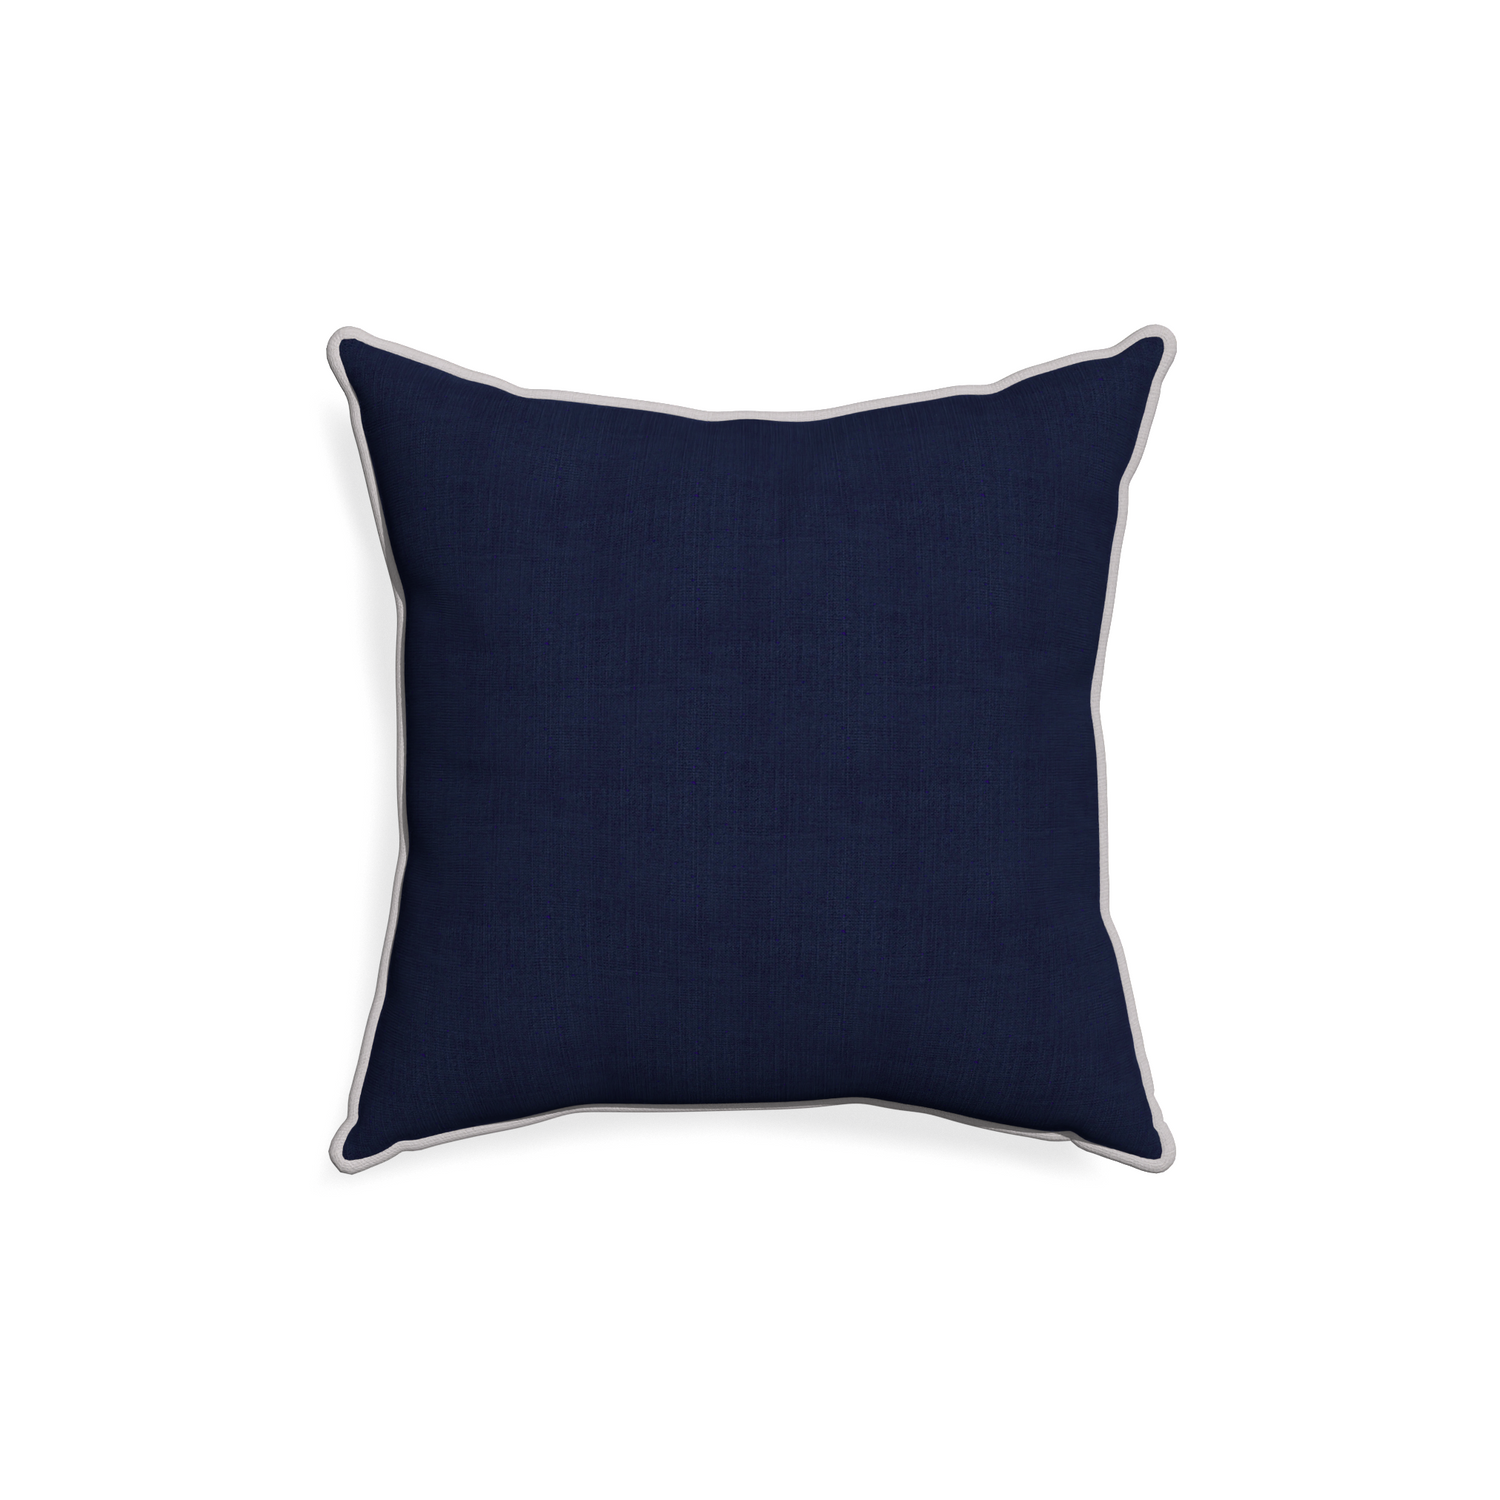 18-square midnight custom navy bluepillow with pebble piping on white background